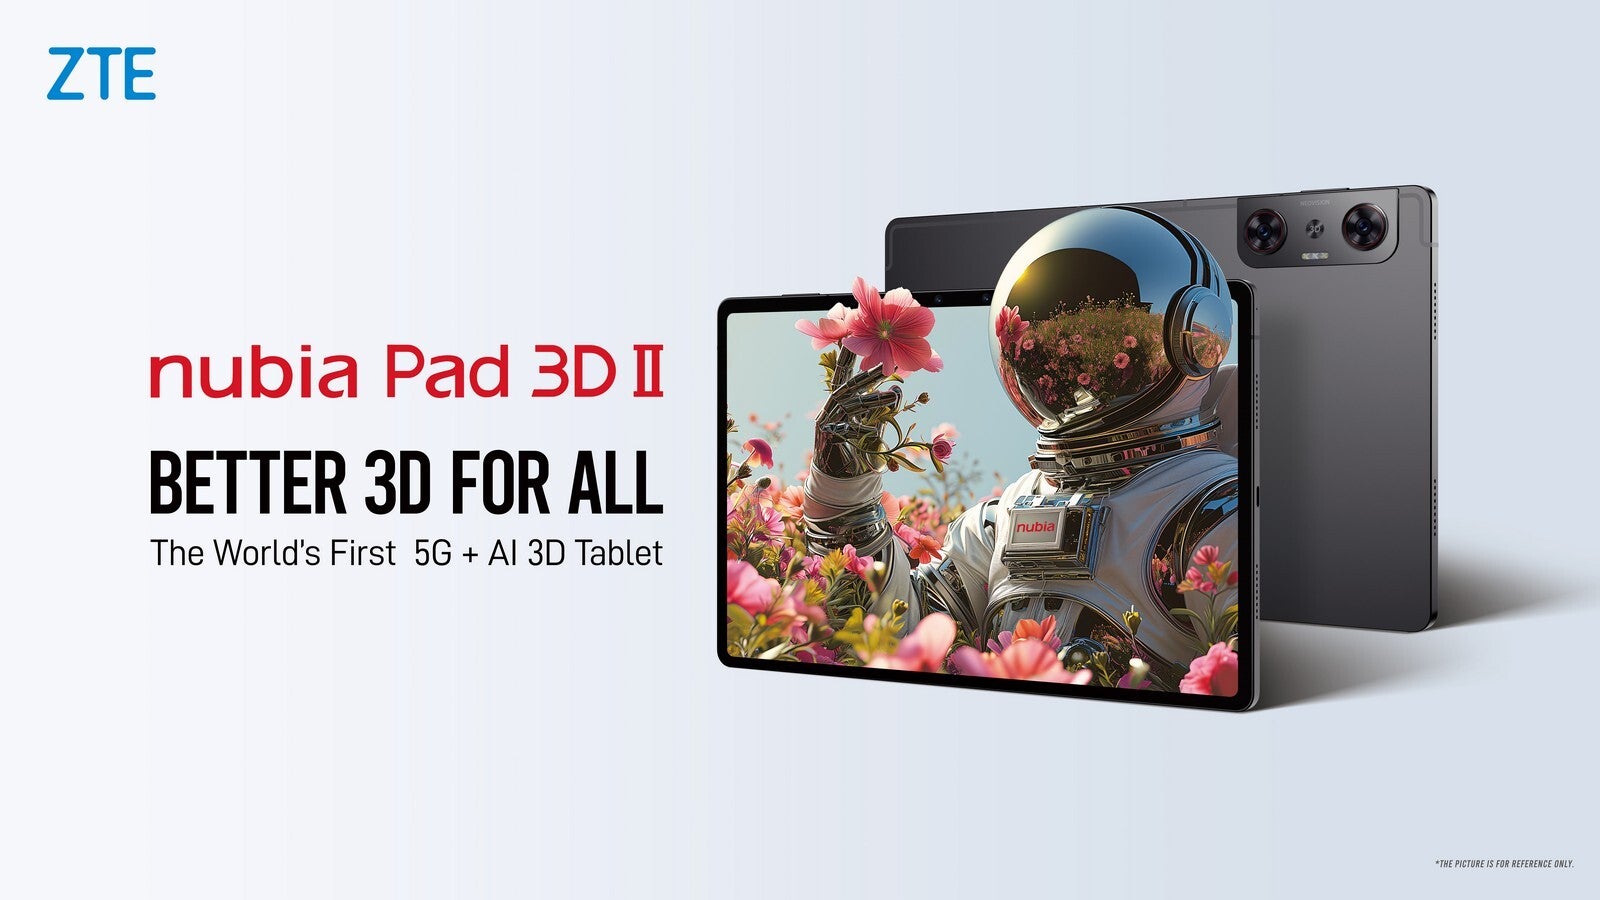 ZTE nubia Pad 3D II uses AI for glasses-free 3D experience and smooth 2D conversion